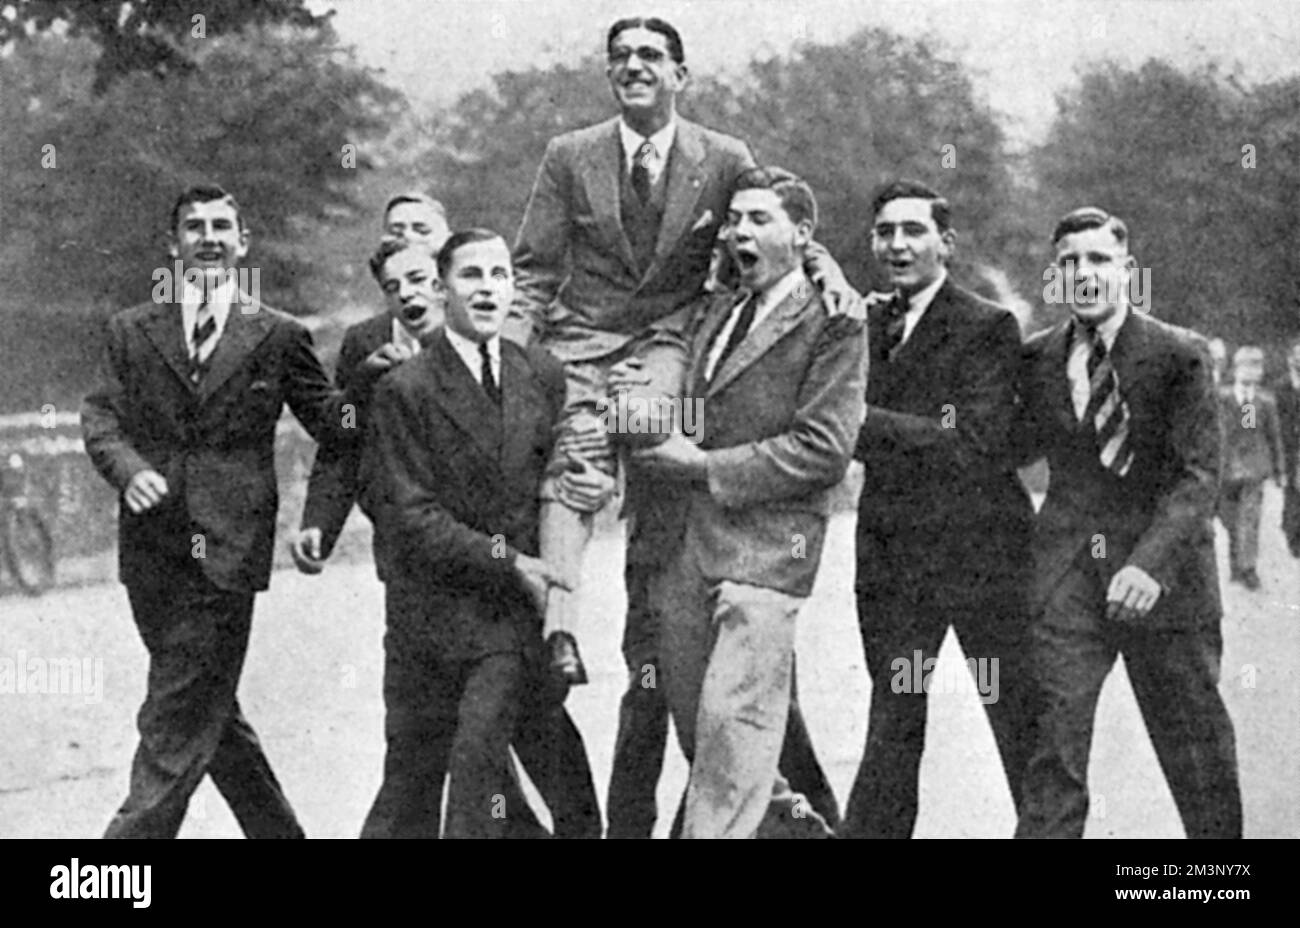 Thomas &quot;Tommy&quot; Hampson (1907  1965), British athlete, winner of the 800 metres at the 1932 Summer Los Angeles Olympics, pictured on the shoulders of boys from St. Alban's School where he was a teacher.       Date: 1932 Stock Photo